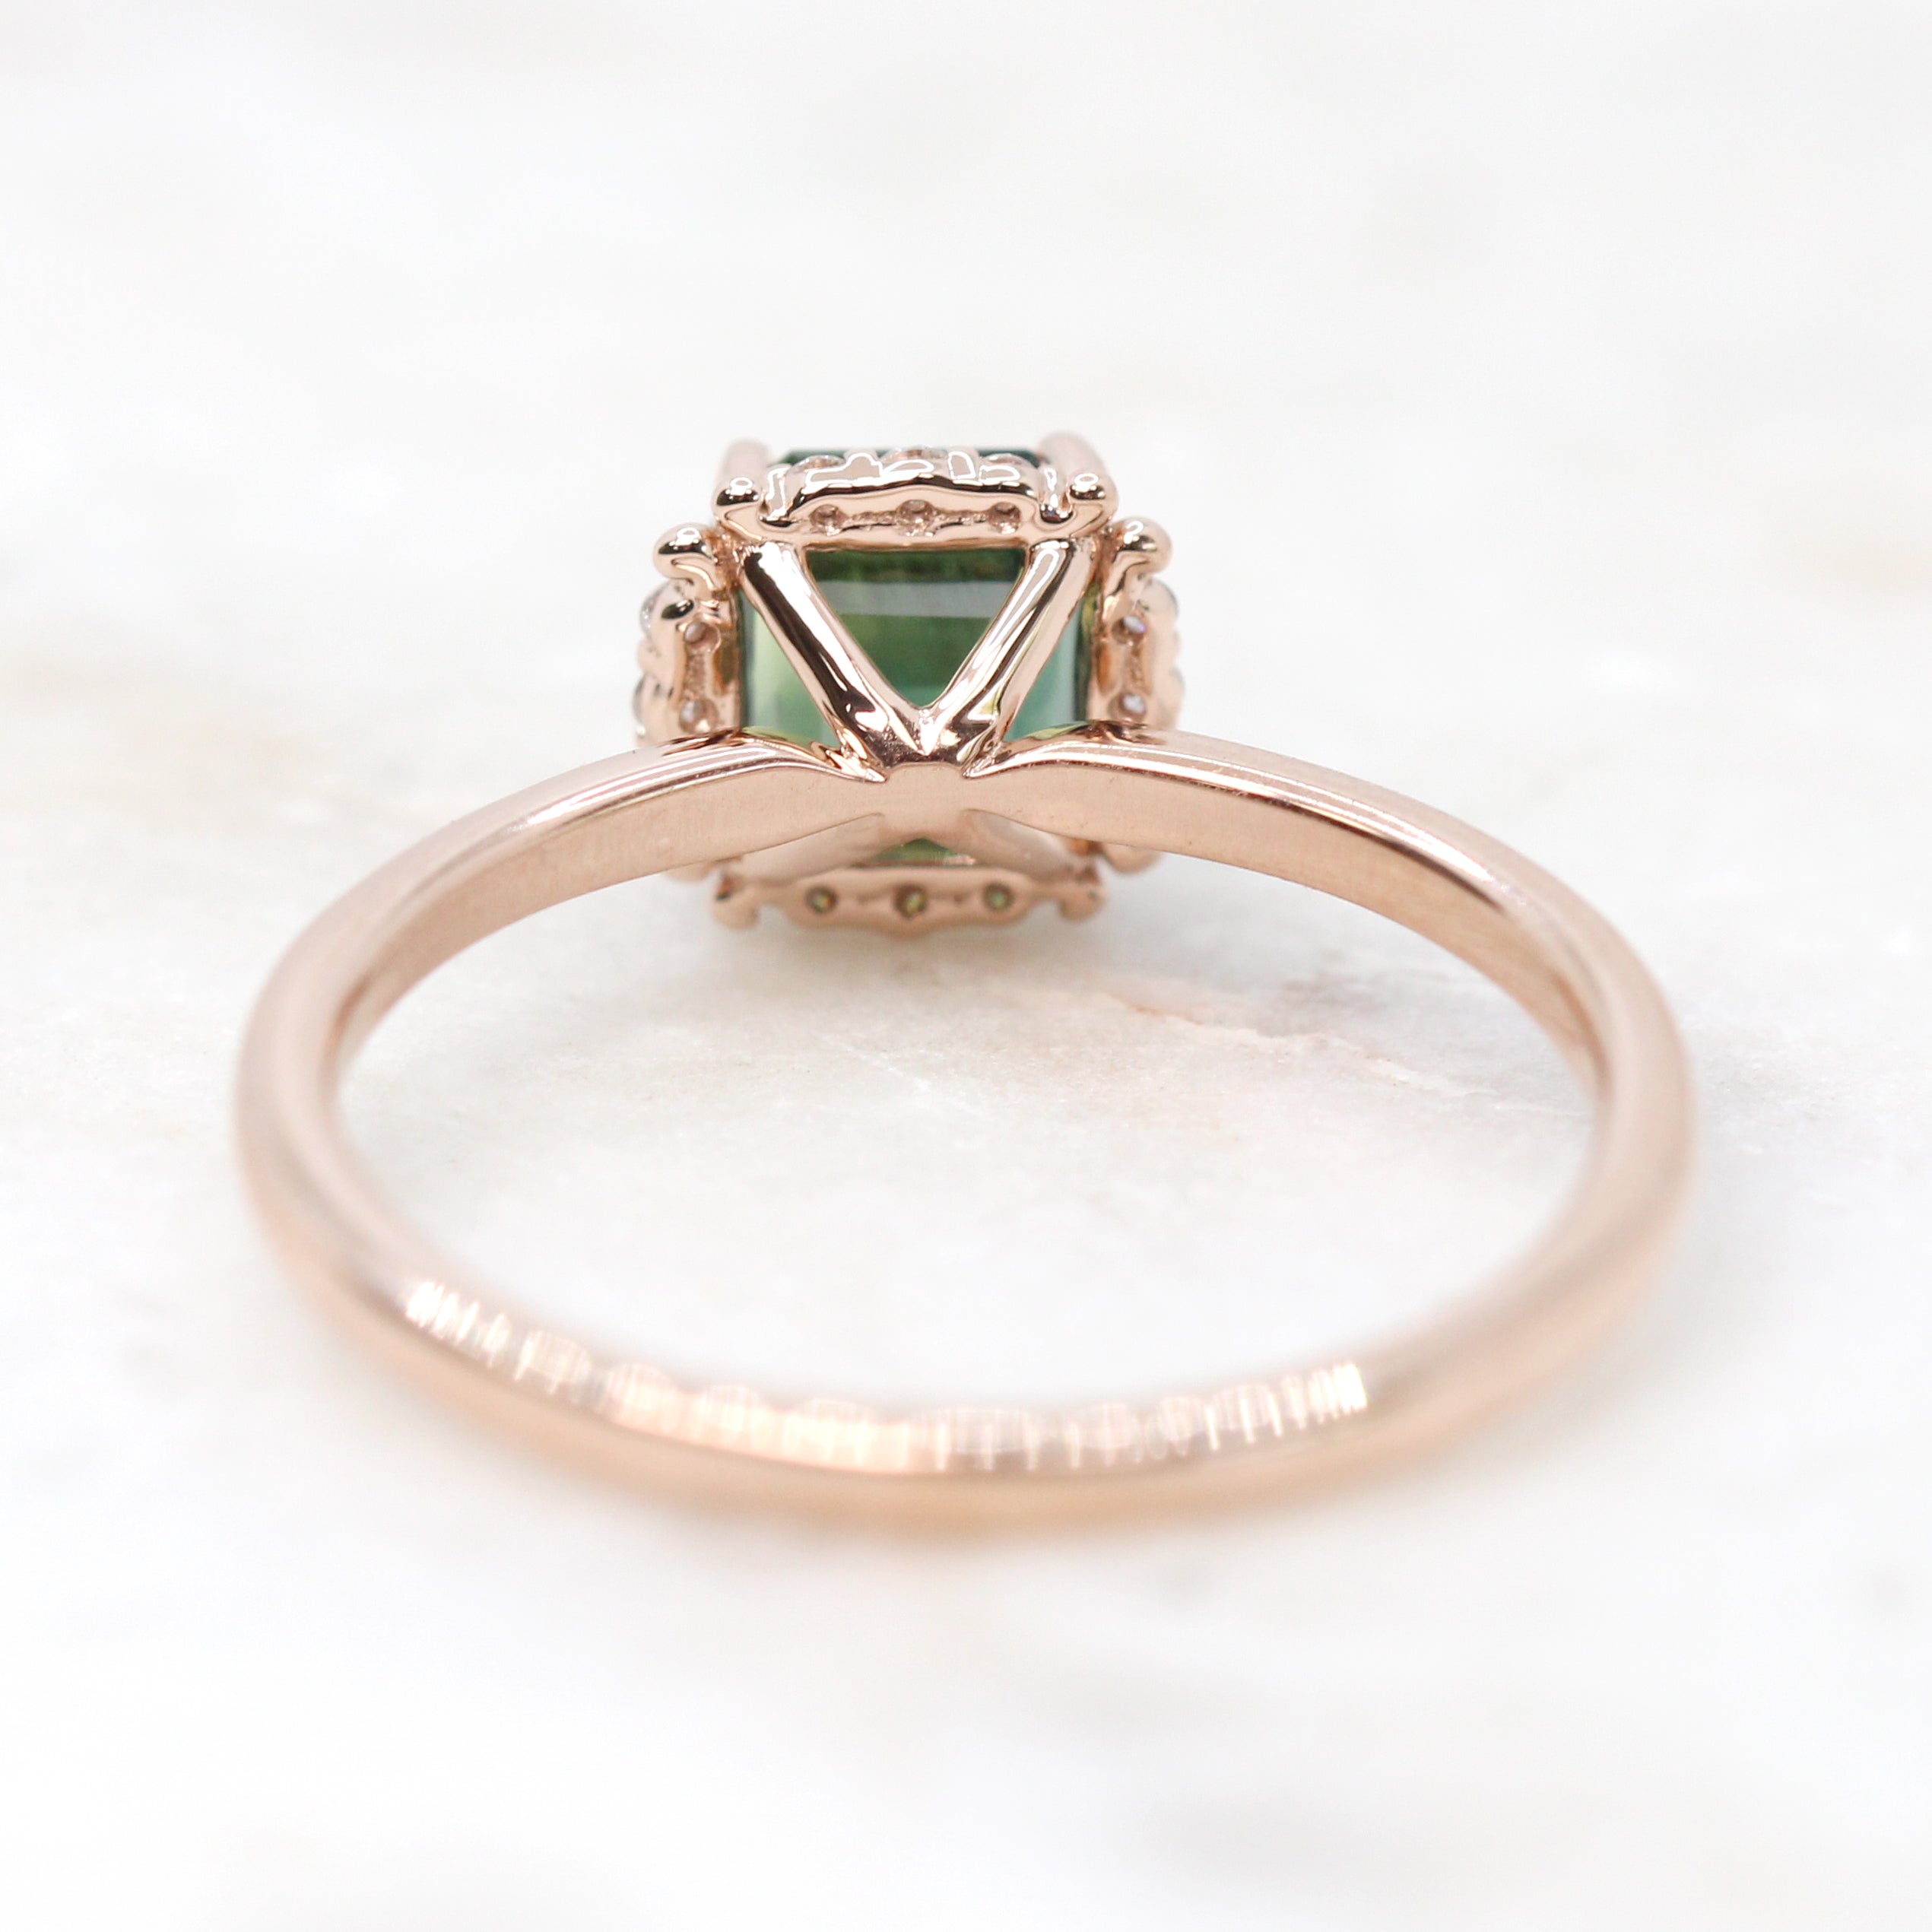 Astrid Ring with a 1.65 Carat Asscher Cut Teal Green Sapphire and White Accent Diamonds in 14k Rose Gold - Ready to Size and Ship - Midwinter Co. Alternative Bridal Rings and Modern Fine Jewelry